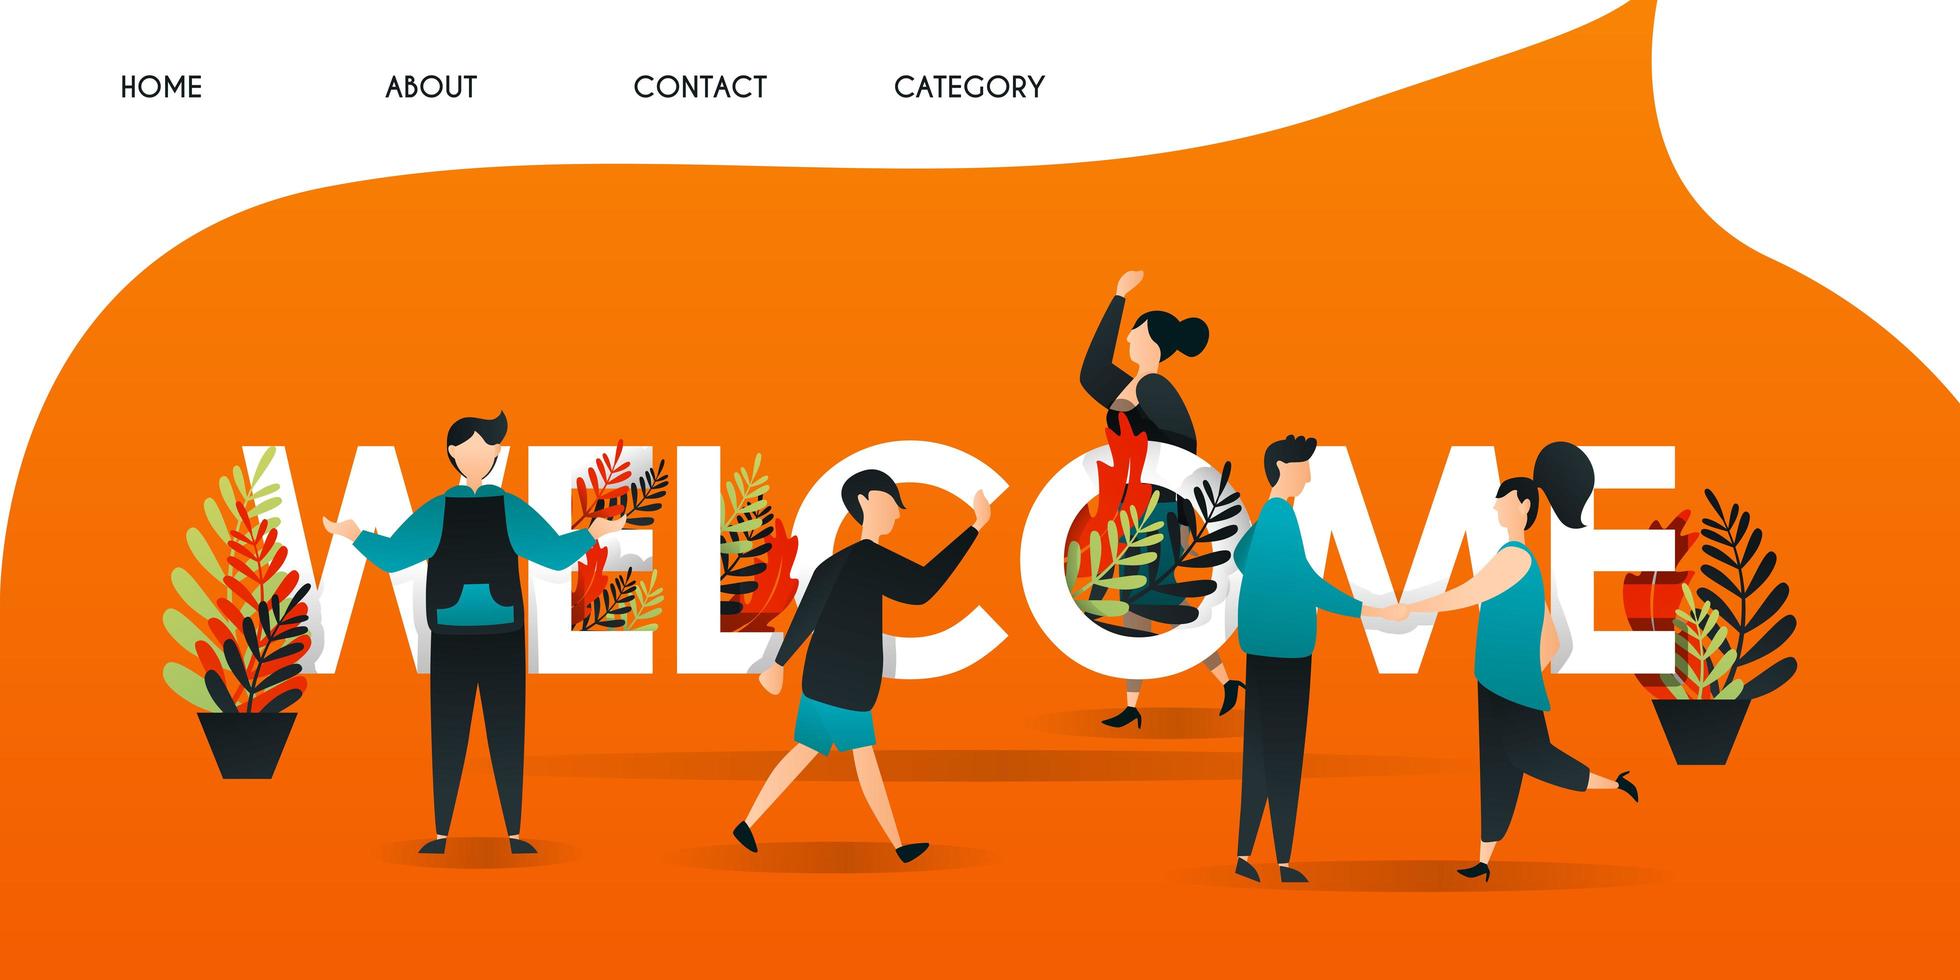 men, women and people who get acquainted with each other in the words WELCOME. the team shook hands to greet and introduce themselves  for web page, banner, presentation, concept Vector illustration